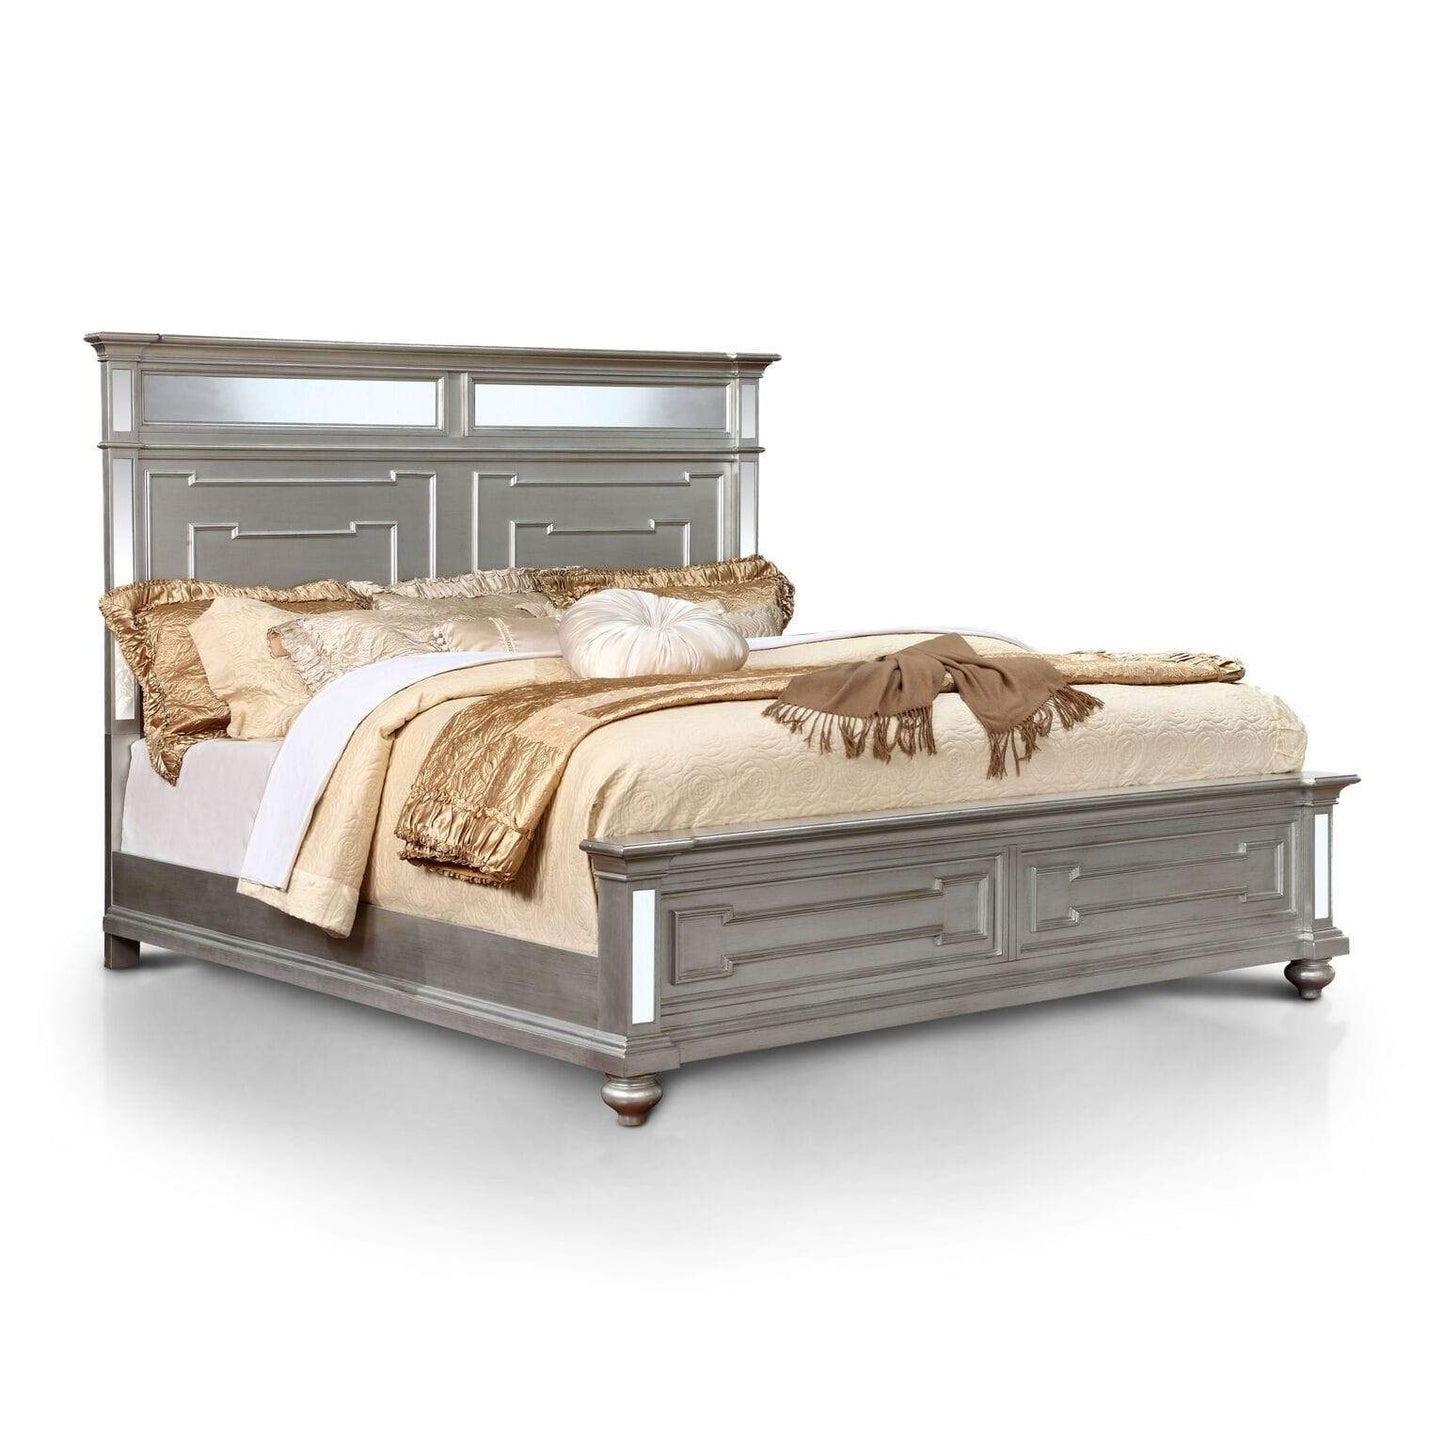 Furniture of America Beds Lindsey Glam Mirrored Cal. King Bed in Silver